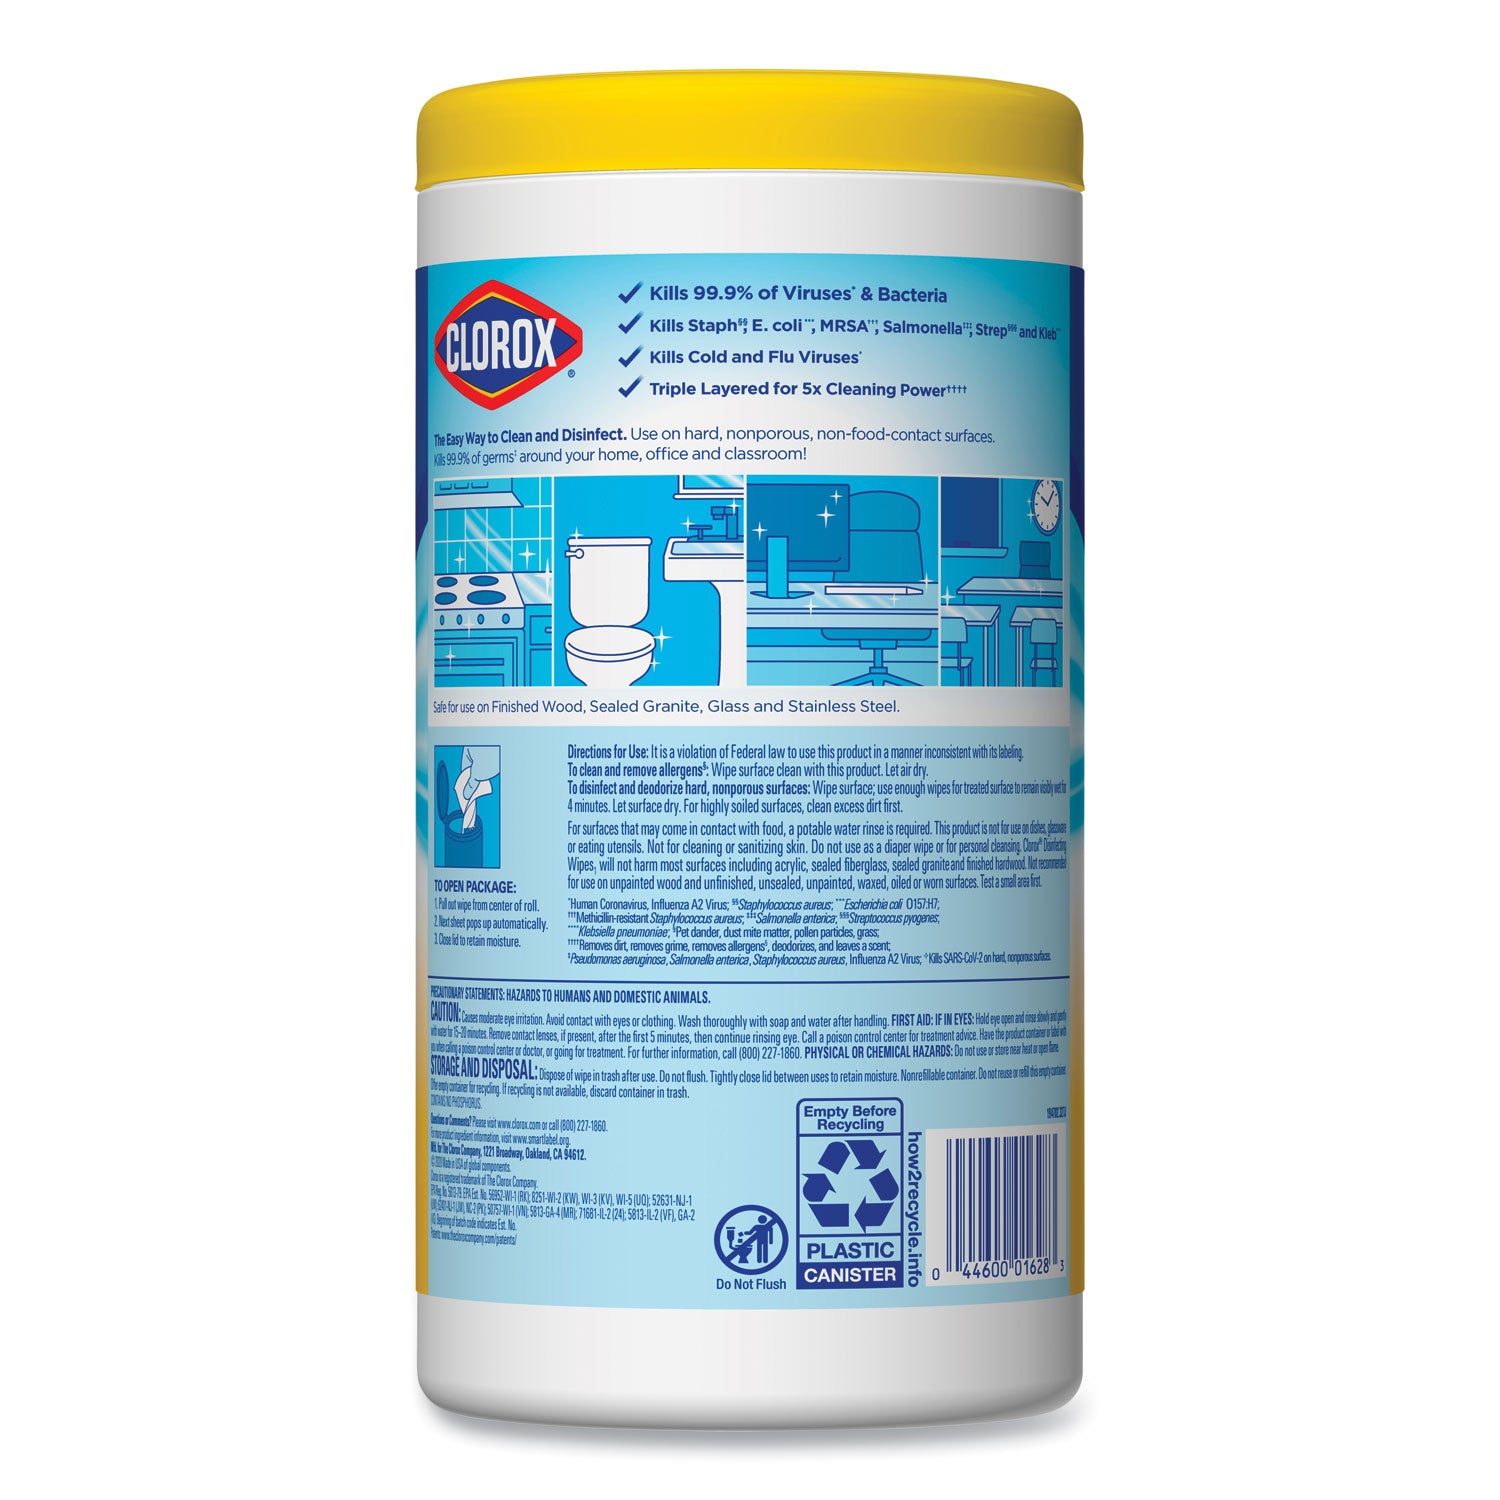 disinfecting-wipes-1-ply-7-x-775-crisp-lemon-white-75-canister-6-canisters-carton_clo01628 - 5